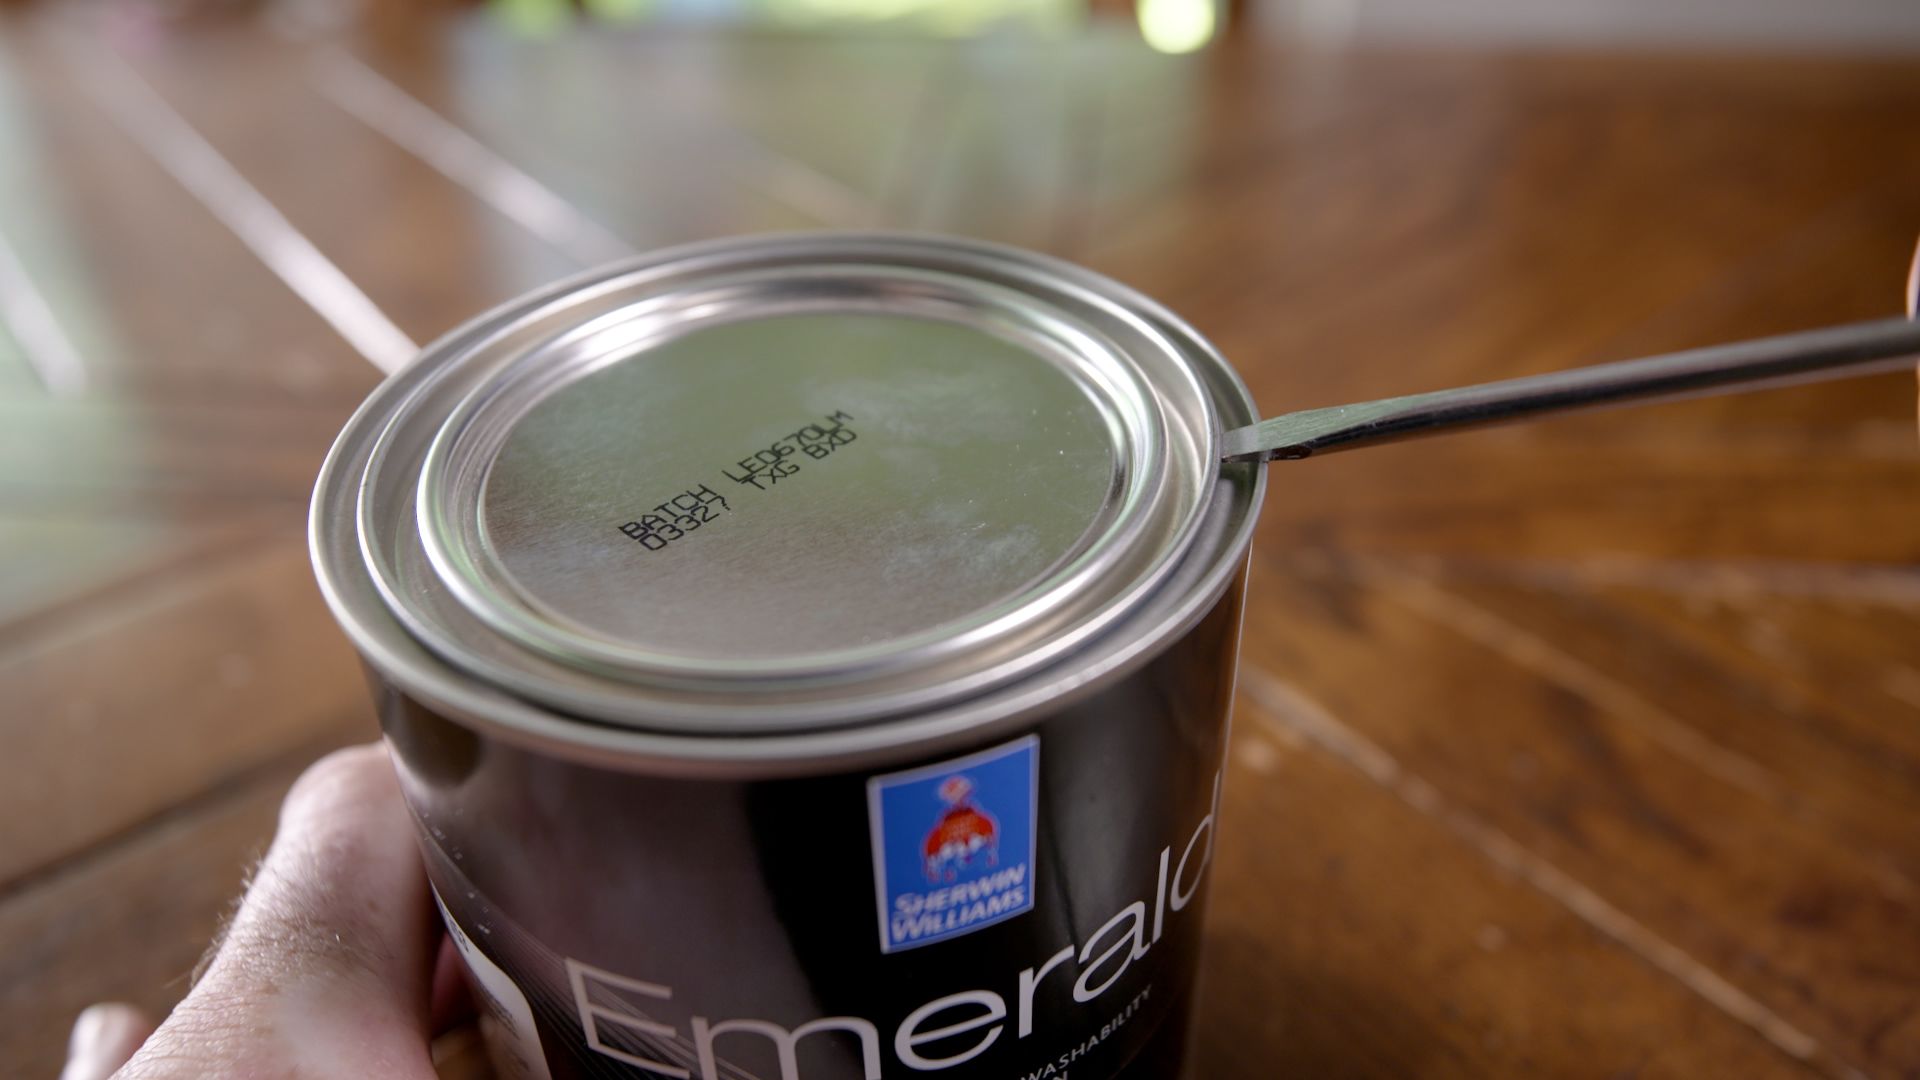 How To Open A Can Of Paint How to Open a Paint Can at Home With Daily-Use Tools - Archute